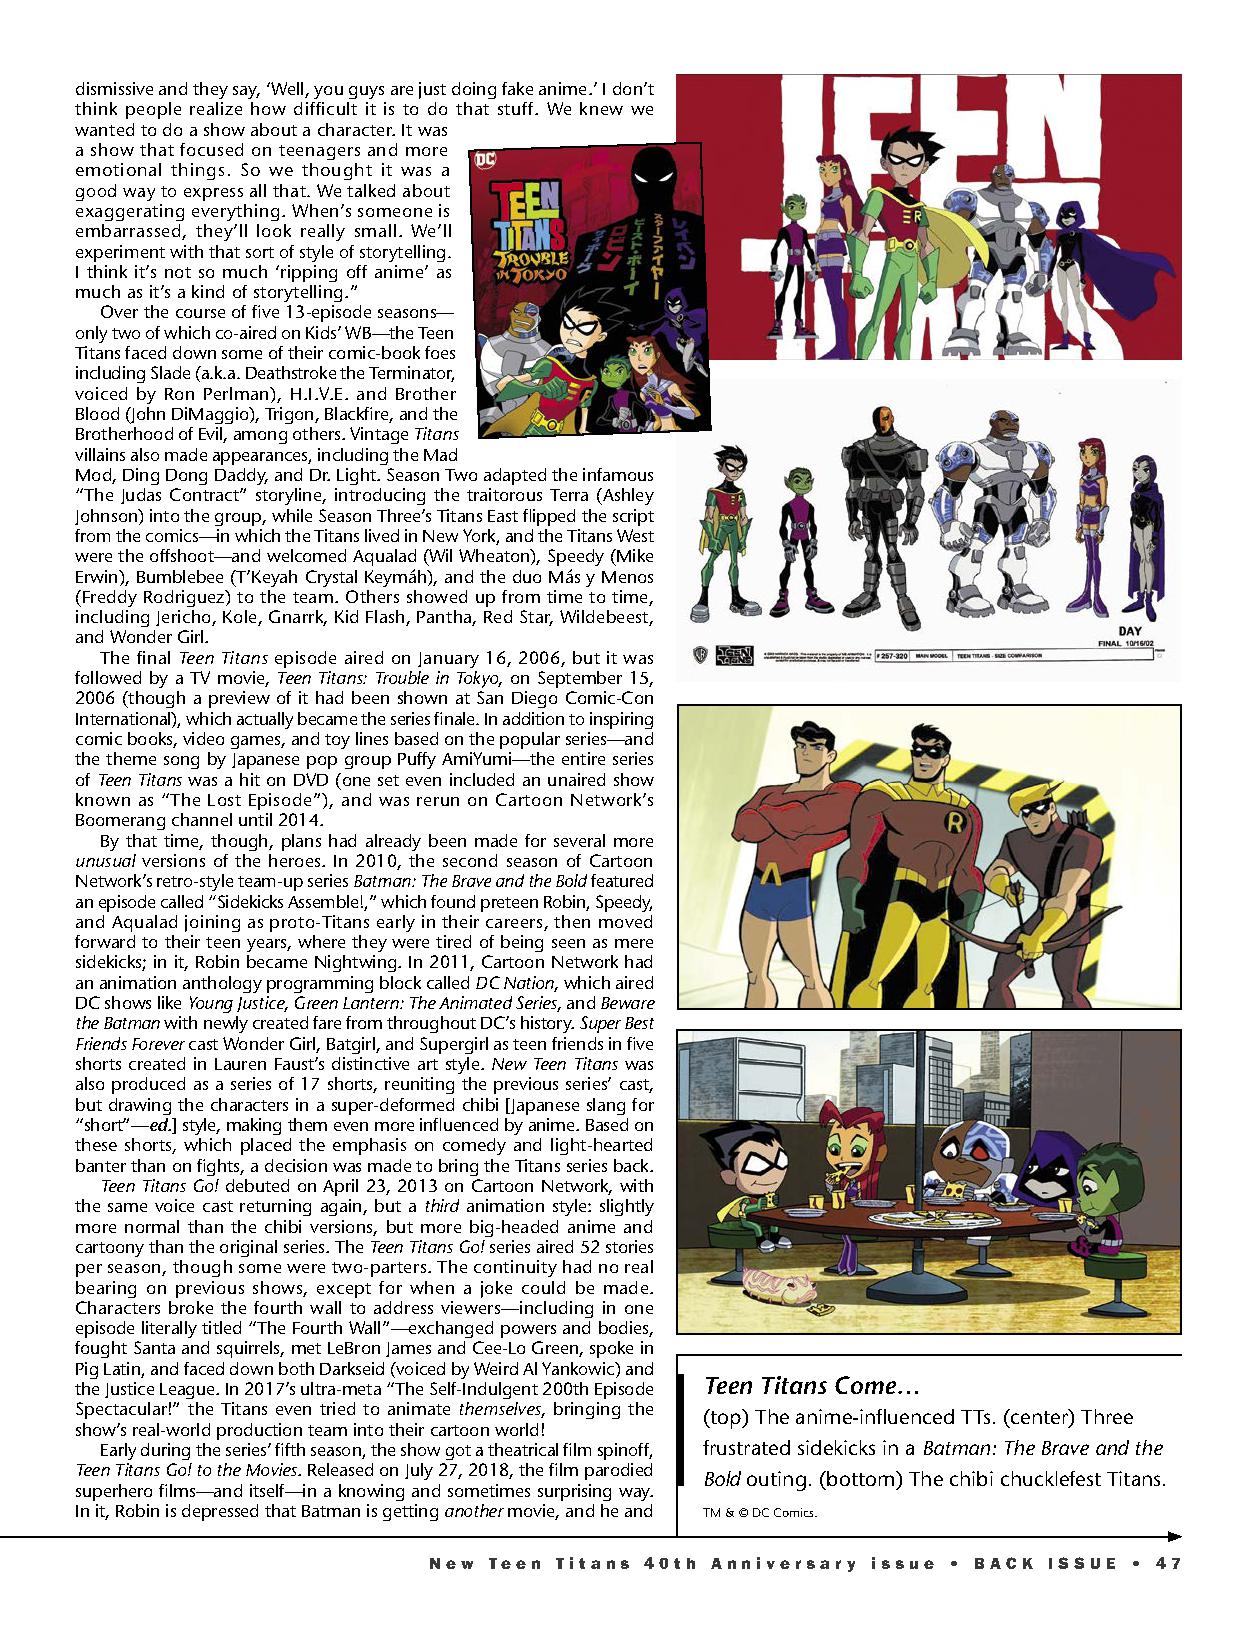 Read online Back Issue comic -  Issue #122 - 49